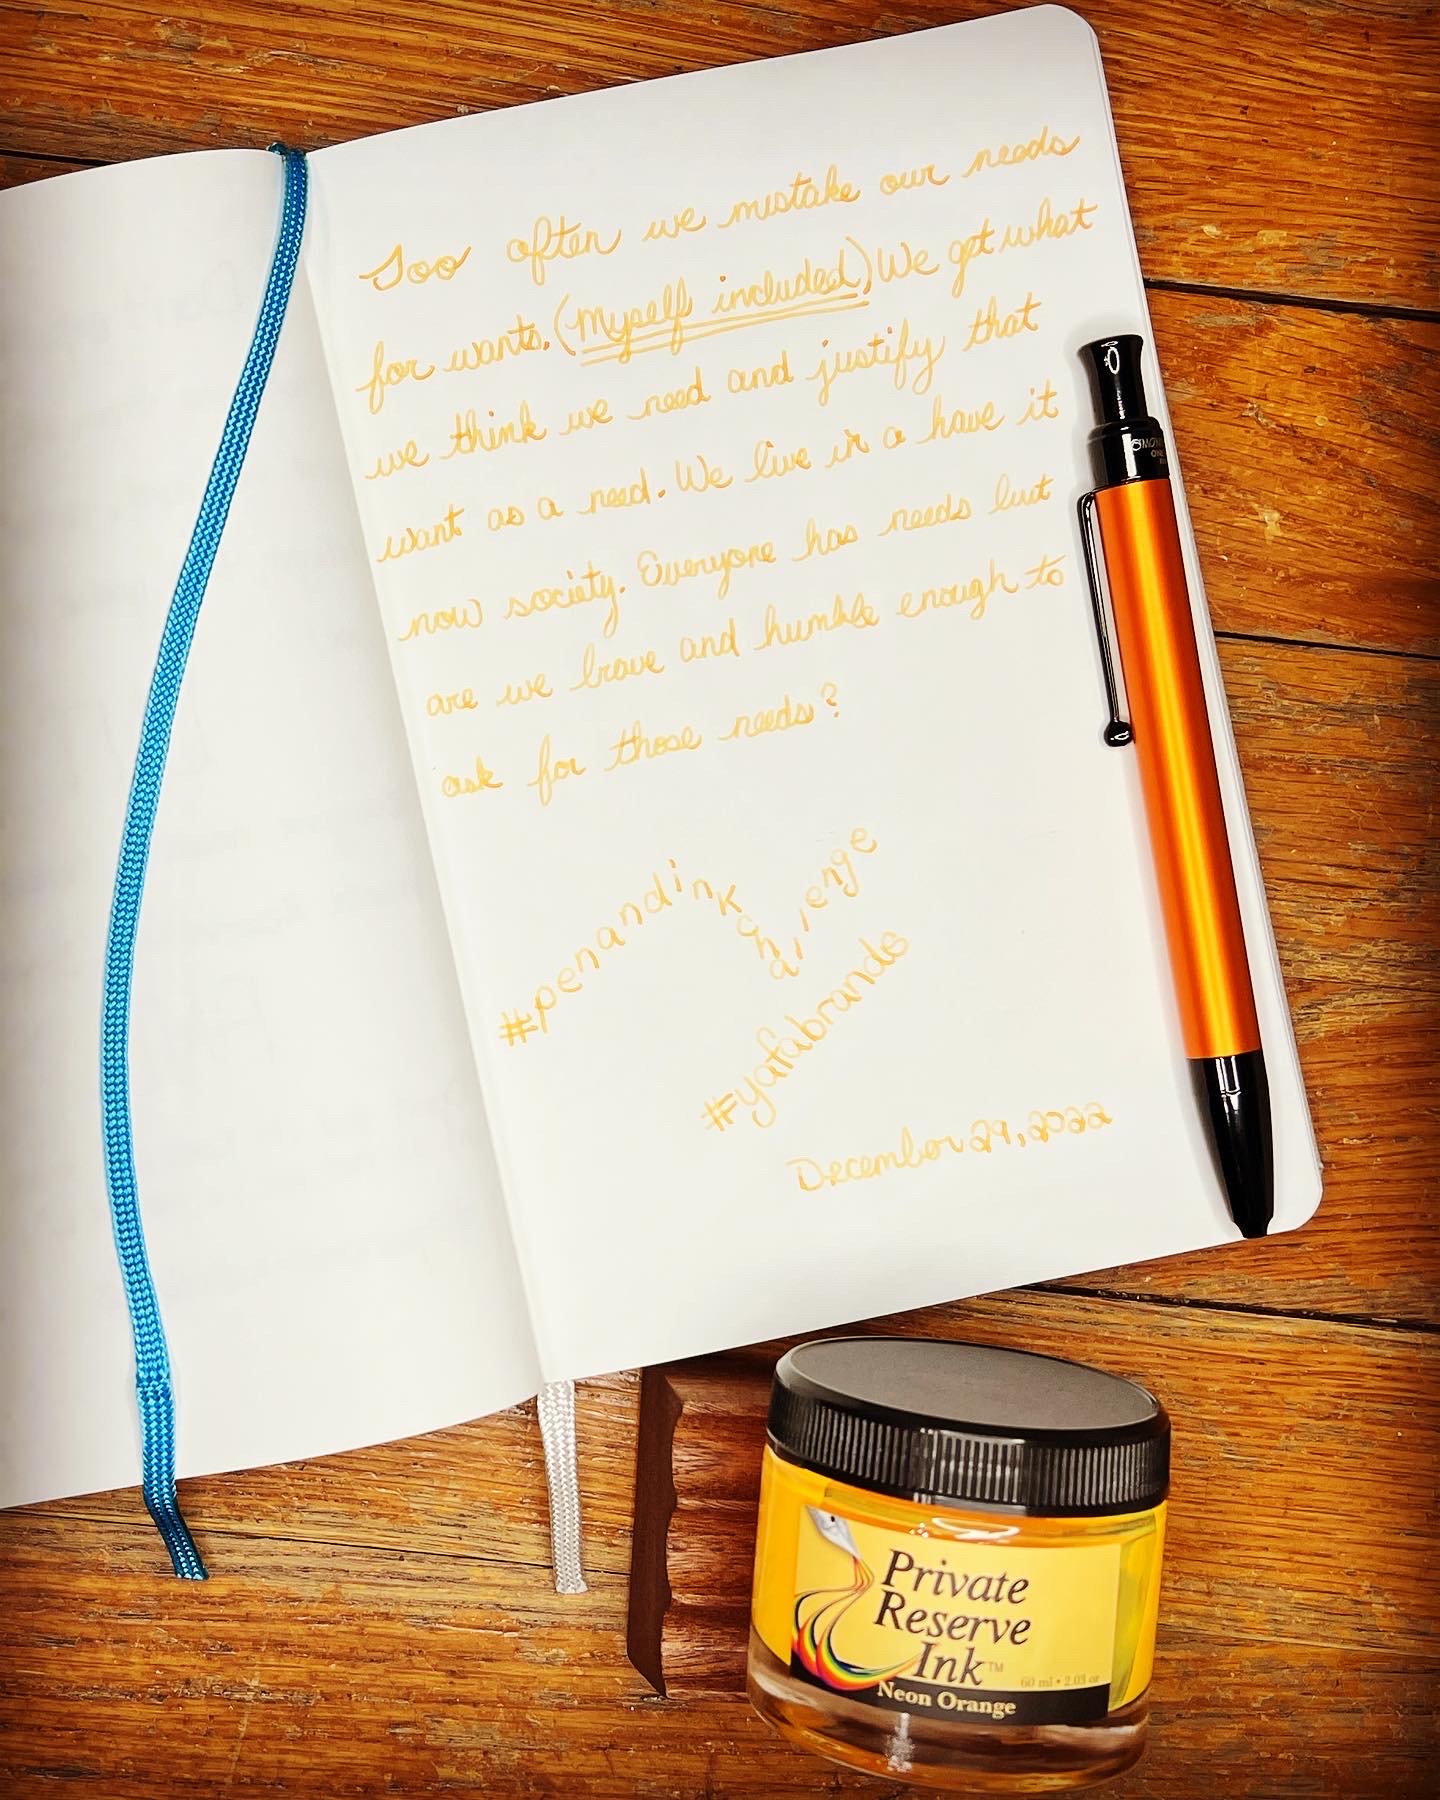 6 (More) Reasons Why You Should Write With a Fountain Pen –  –  Fountain Pen, Ink, and Stationery Reviews